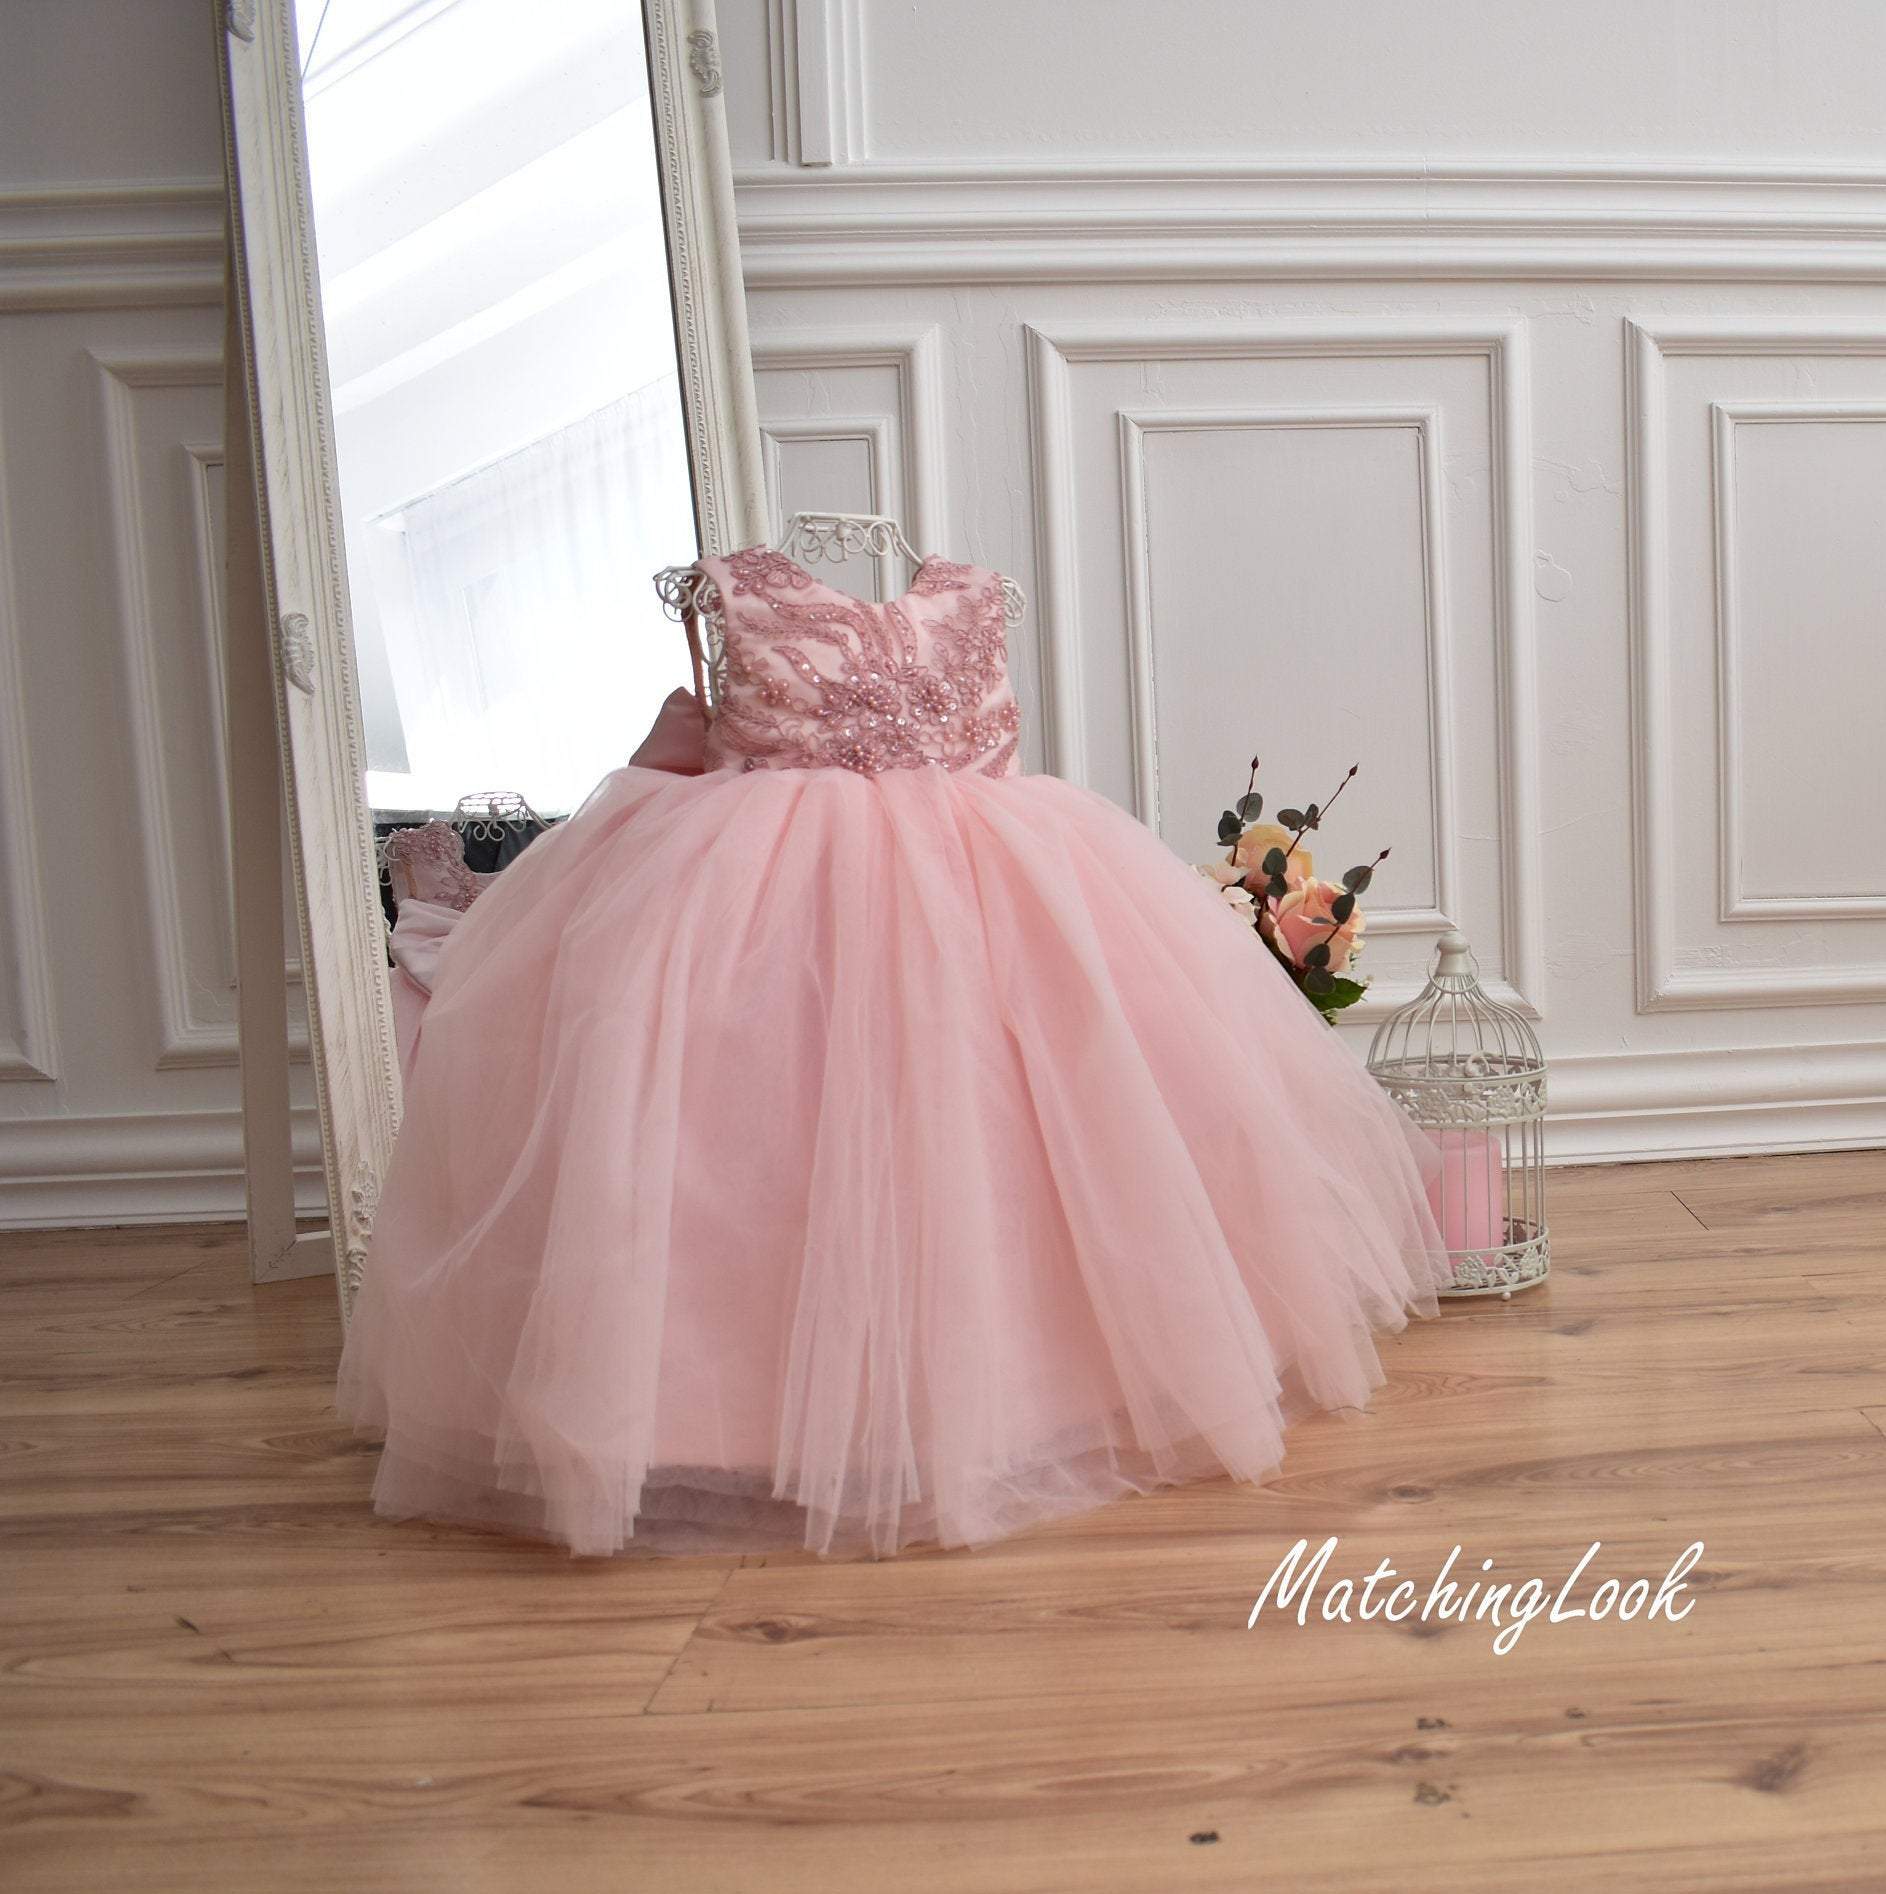 Pink Tulle Baby Girl Dress with Ribbon, Pink Girl Puffy Dress, Pink Baby  Tutu Dress, Princess Dress, Baby Flower Dress, Baby Wedding Dress